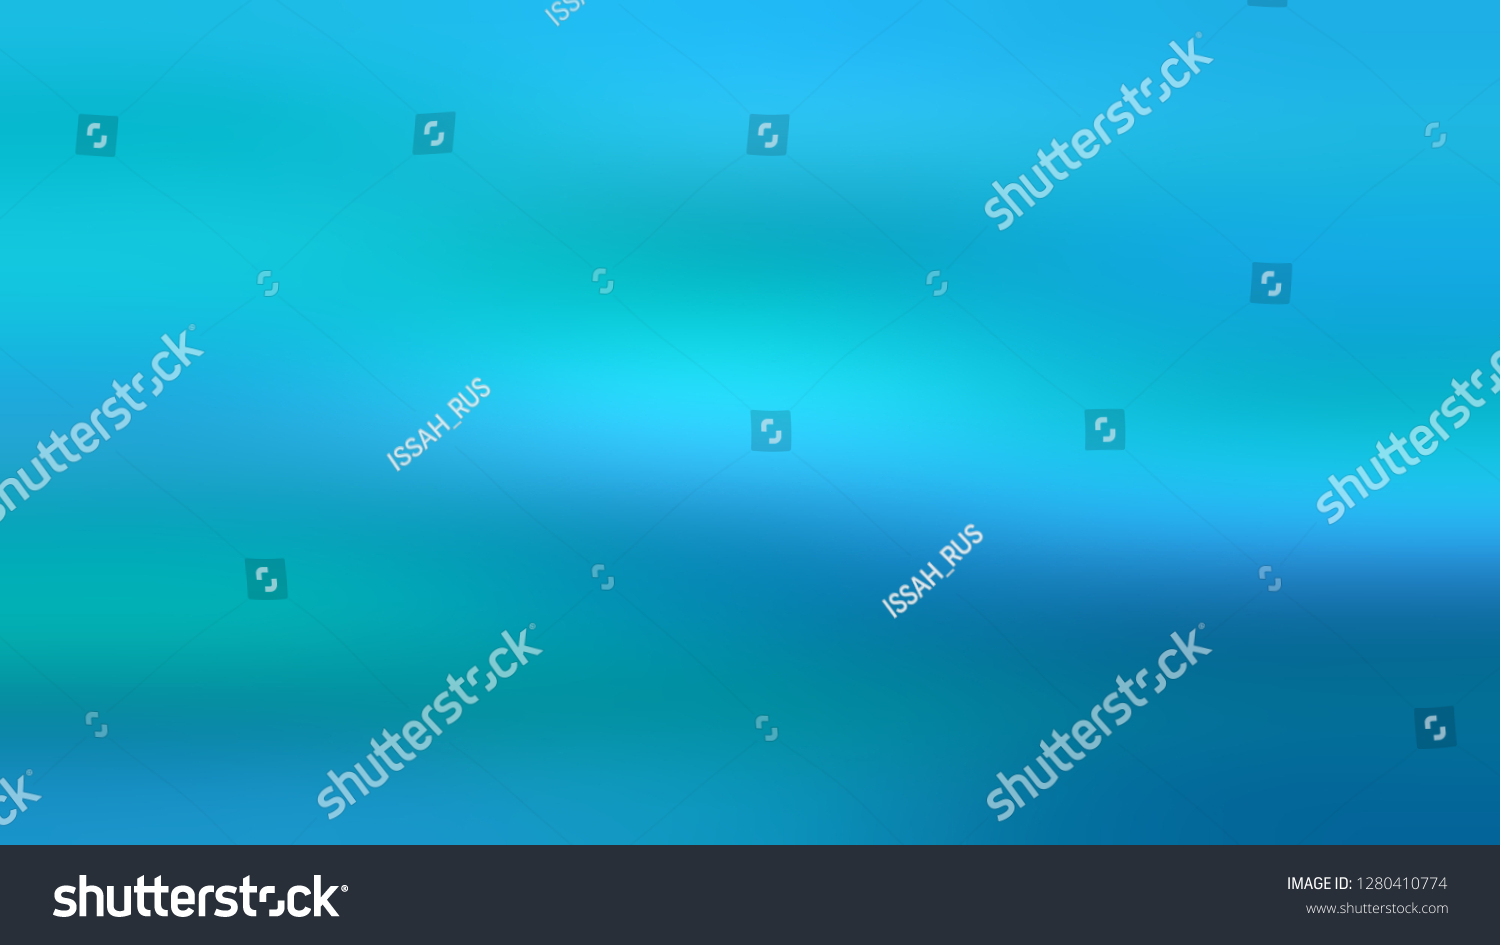 Gradient Background Blue To Cyan Cool Blue And Green Hues. Pure Cyan-Blue Gradient For Business Blog Section Headers, Providing Solid Light Tone. Audacious Gradient Backdrop For Social Media Posts. #1280410774